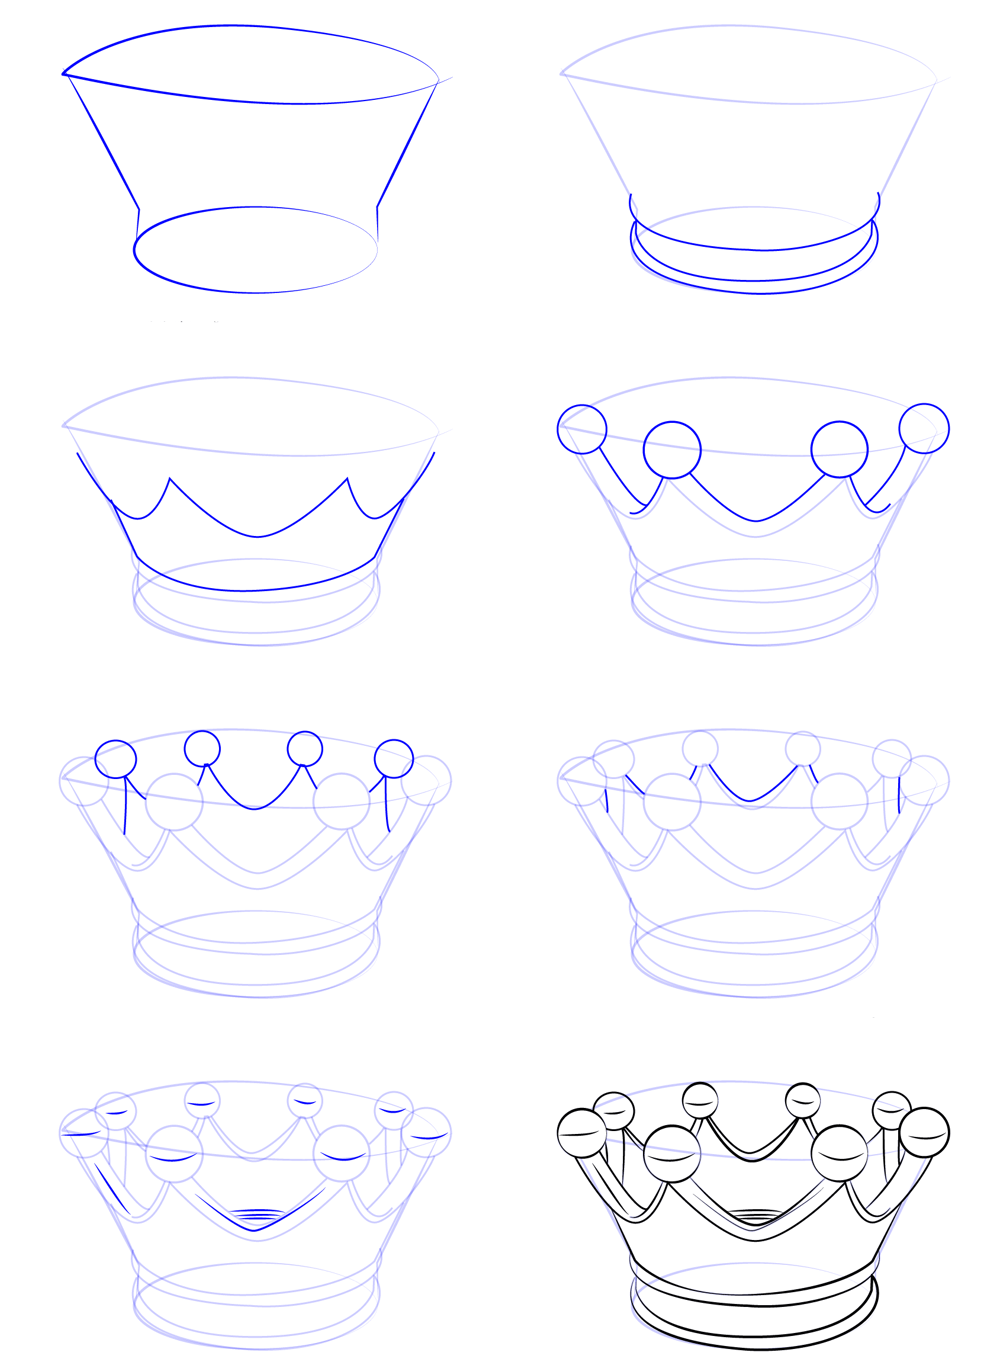 How to draw Draw a simple crown